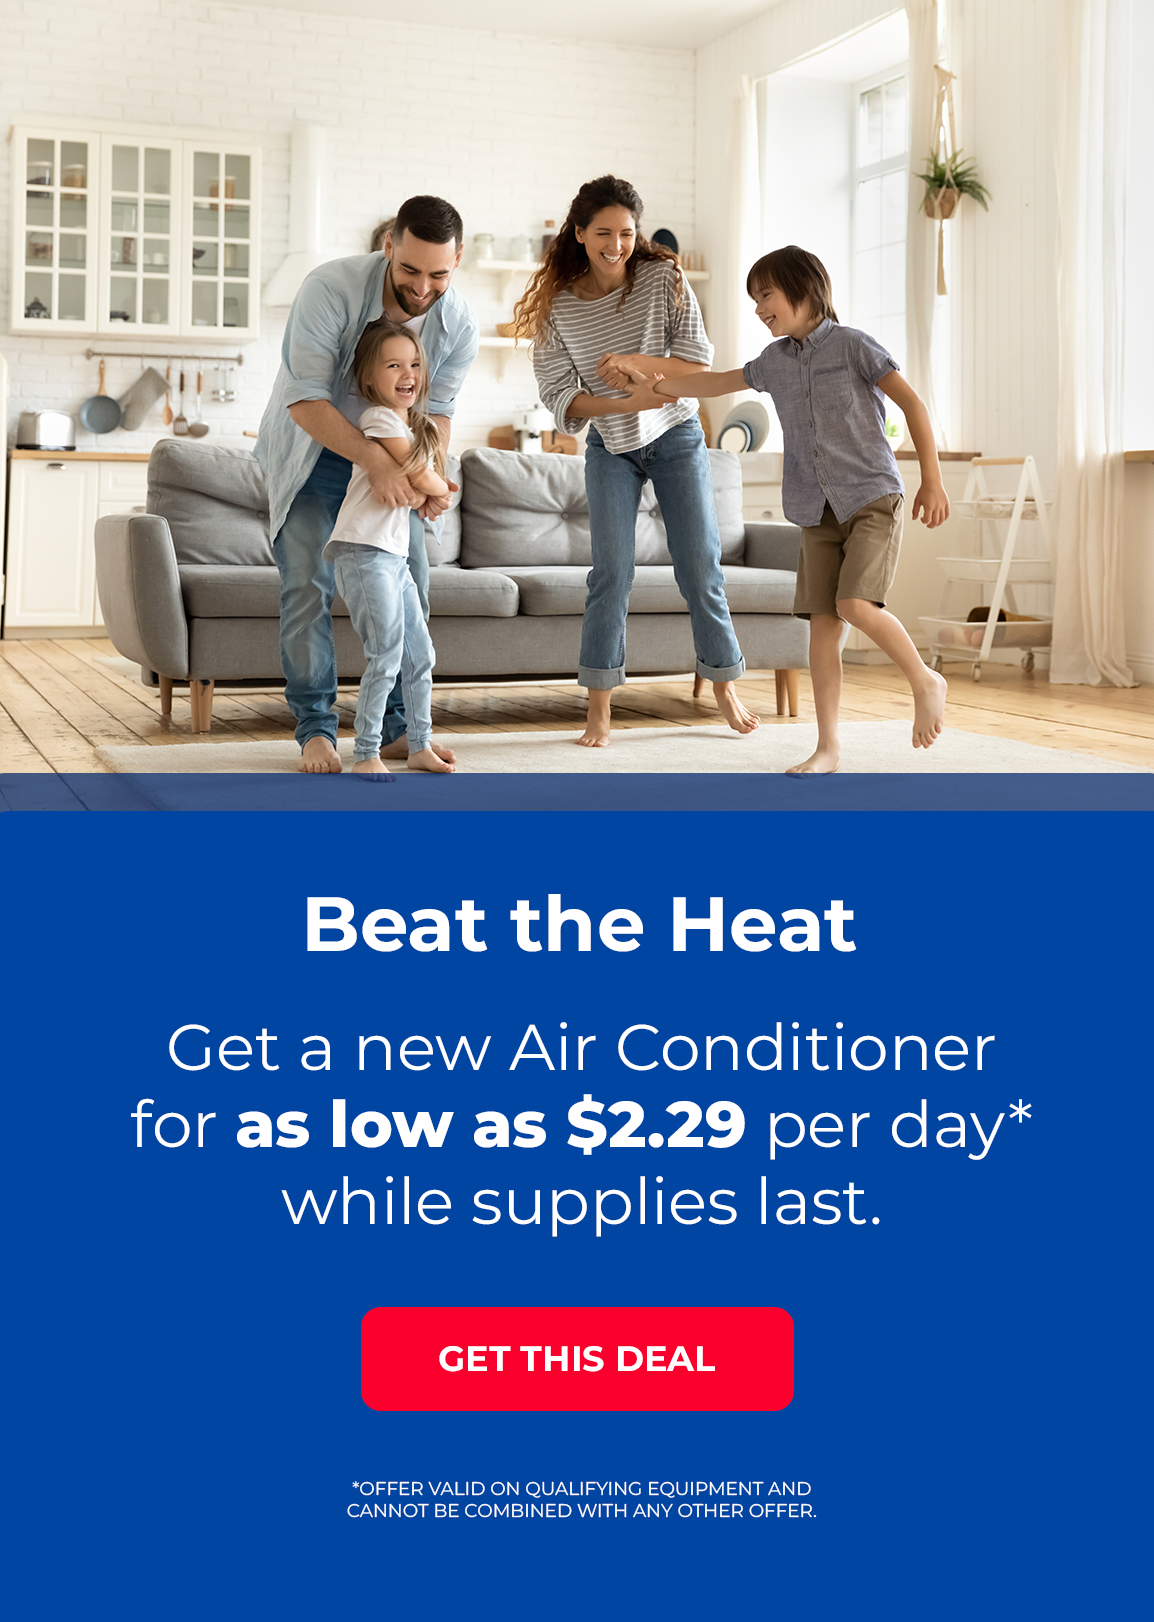 HVAC Hamilton. Save up to $2000 on select systems